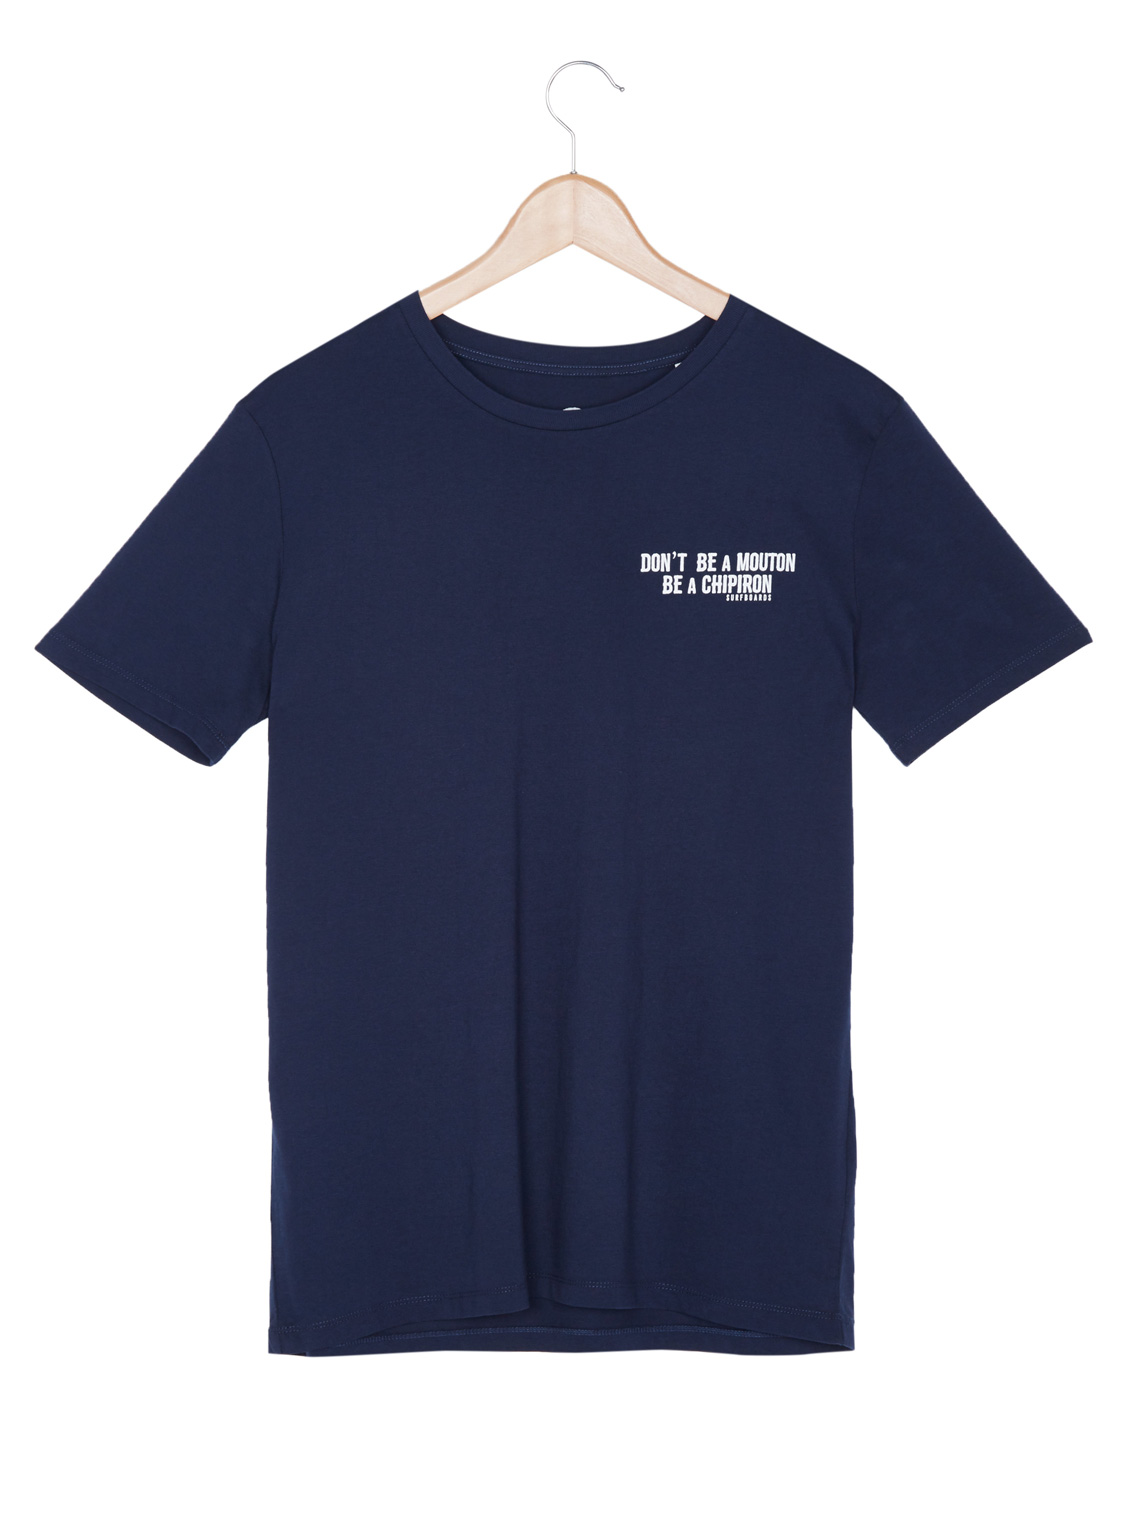 Tshirt Don't be a mouton pocket navy